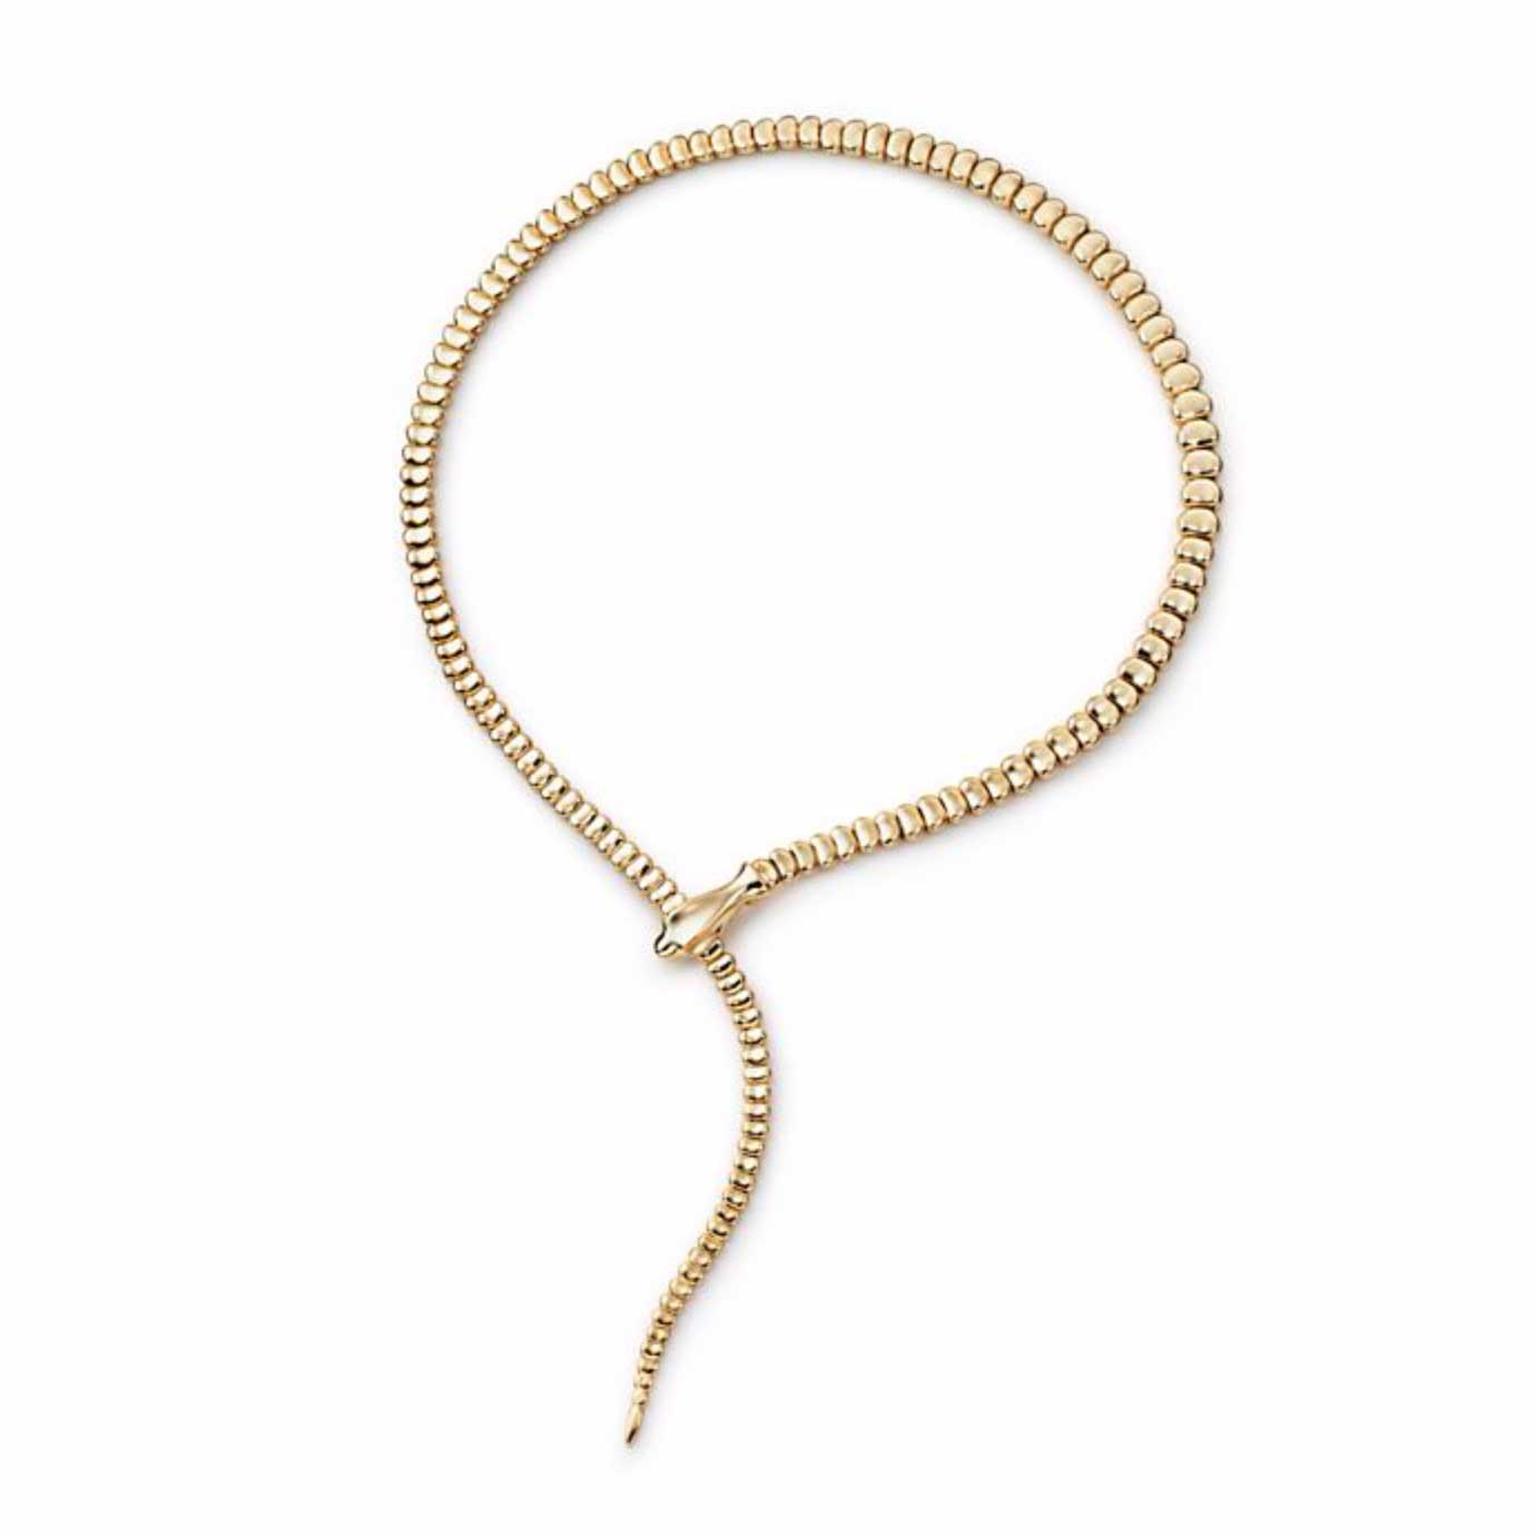 Elsa Peretti for Tiffany Snake necklace in yellow gold